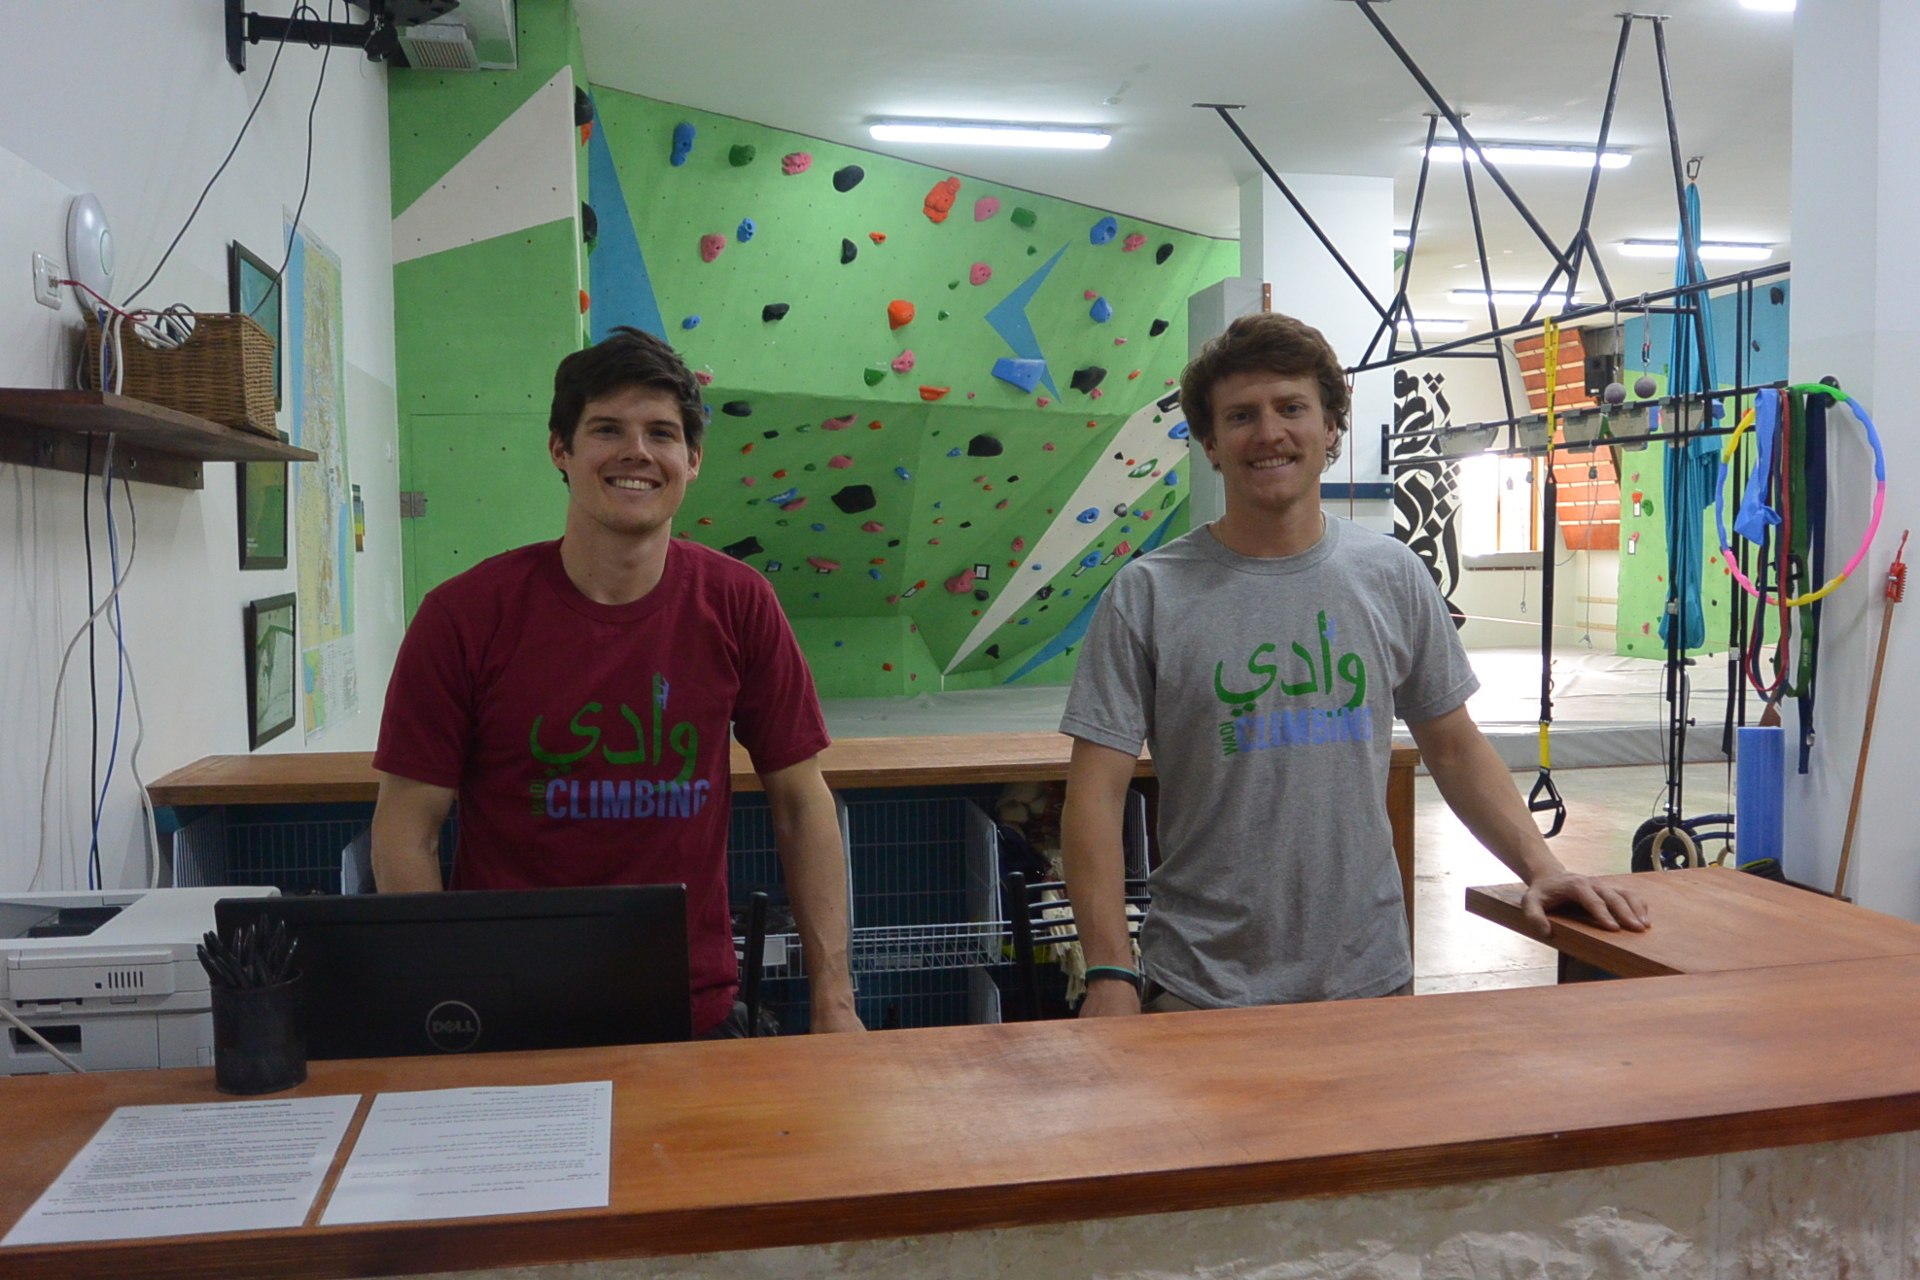 CC alums Tim Bruns '14 and Will Harris '14 standing in the Wadi Climbing Gym they founded in Palestine.